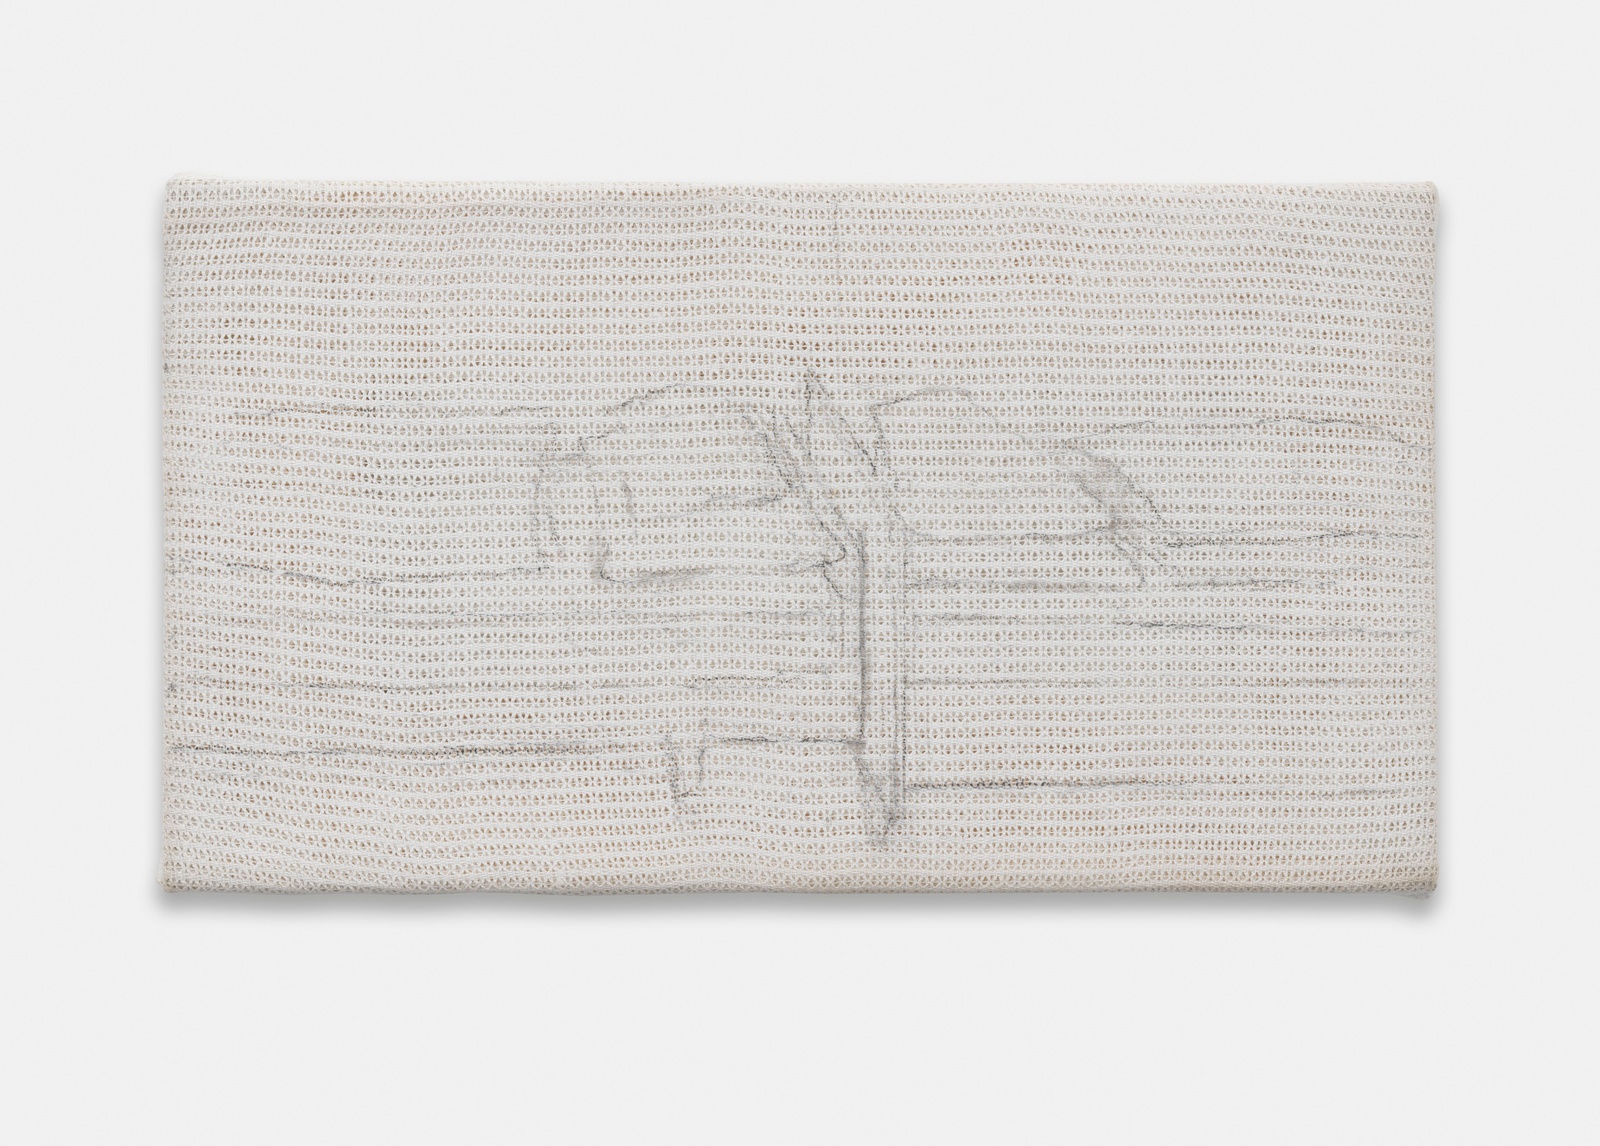 Beaux MendesUntitled, 2023charcoal on medical gauze14.5 x 26.5 | 5 2/3 x 10 1/2 in